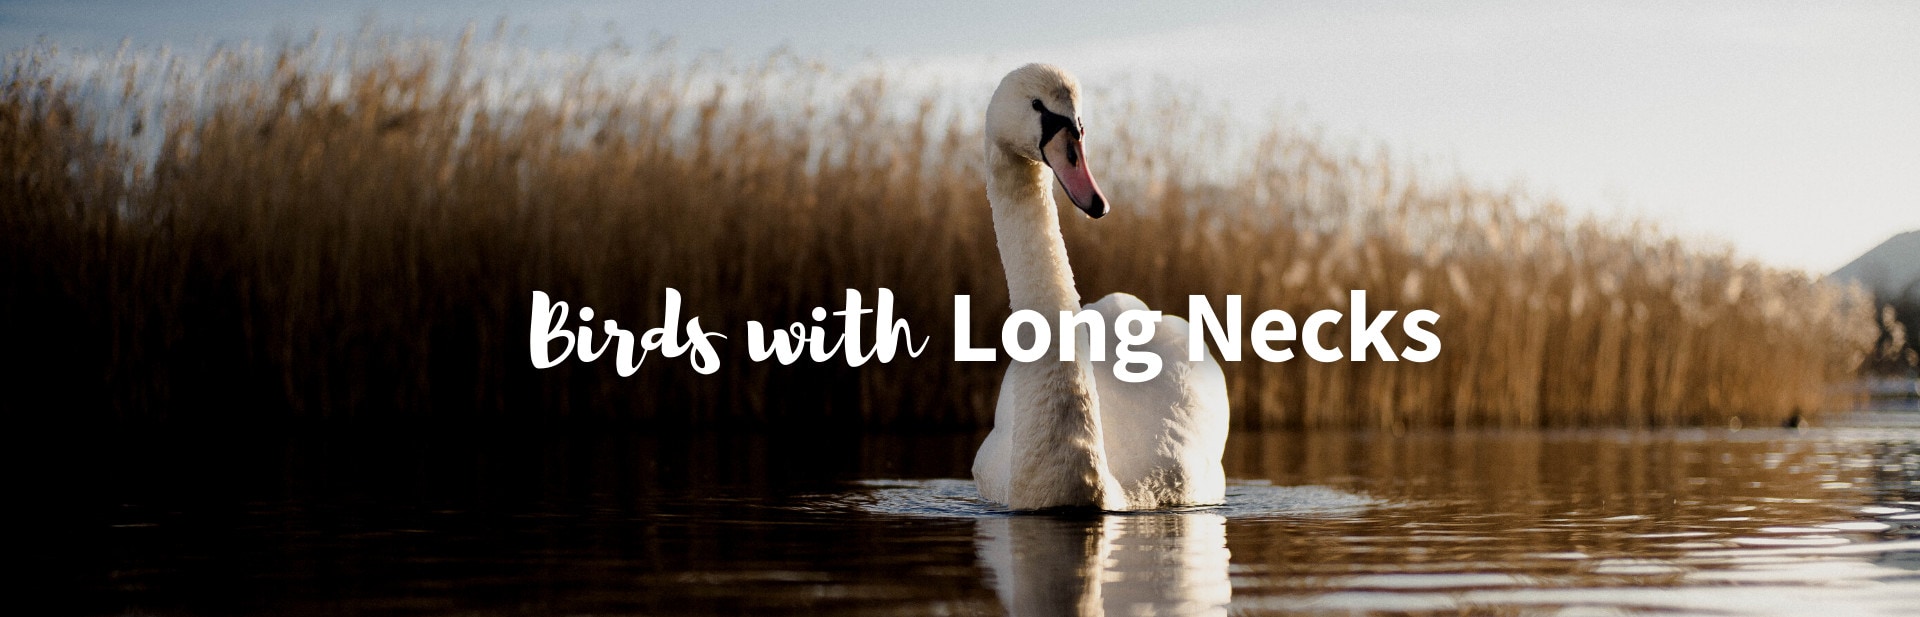 15 Amazing Birds with Long Necks From Around The World (Must-See!)